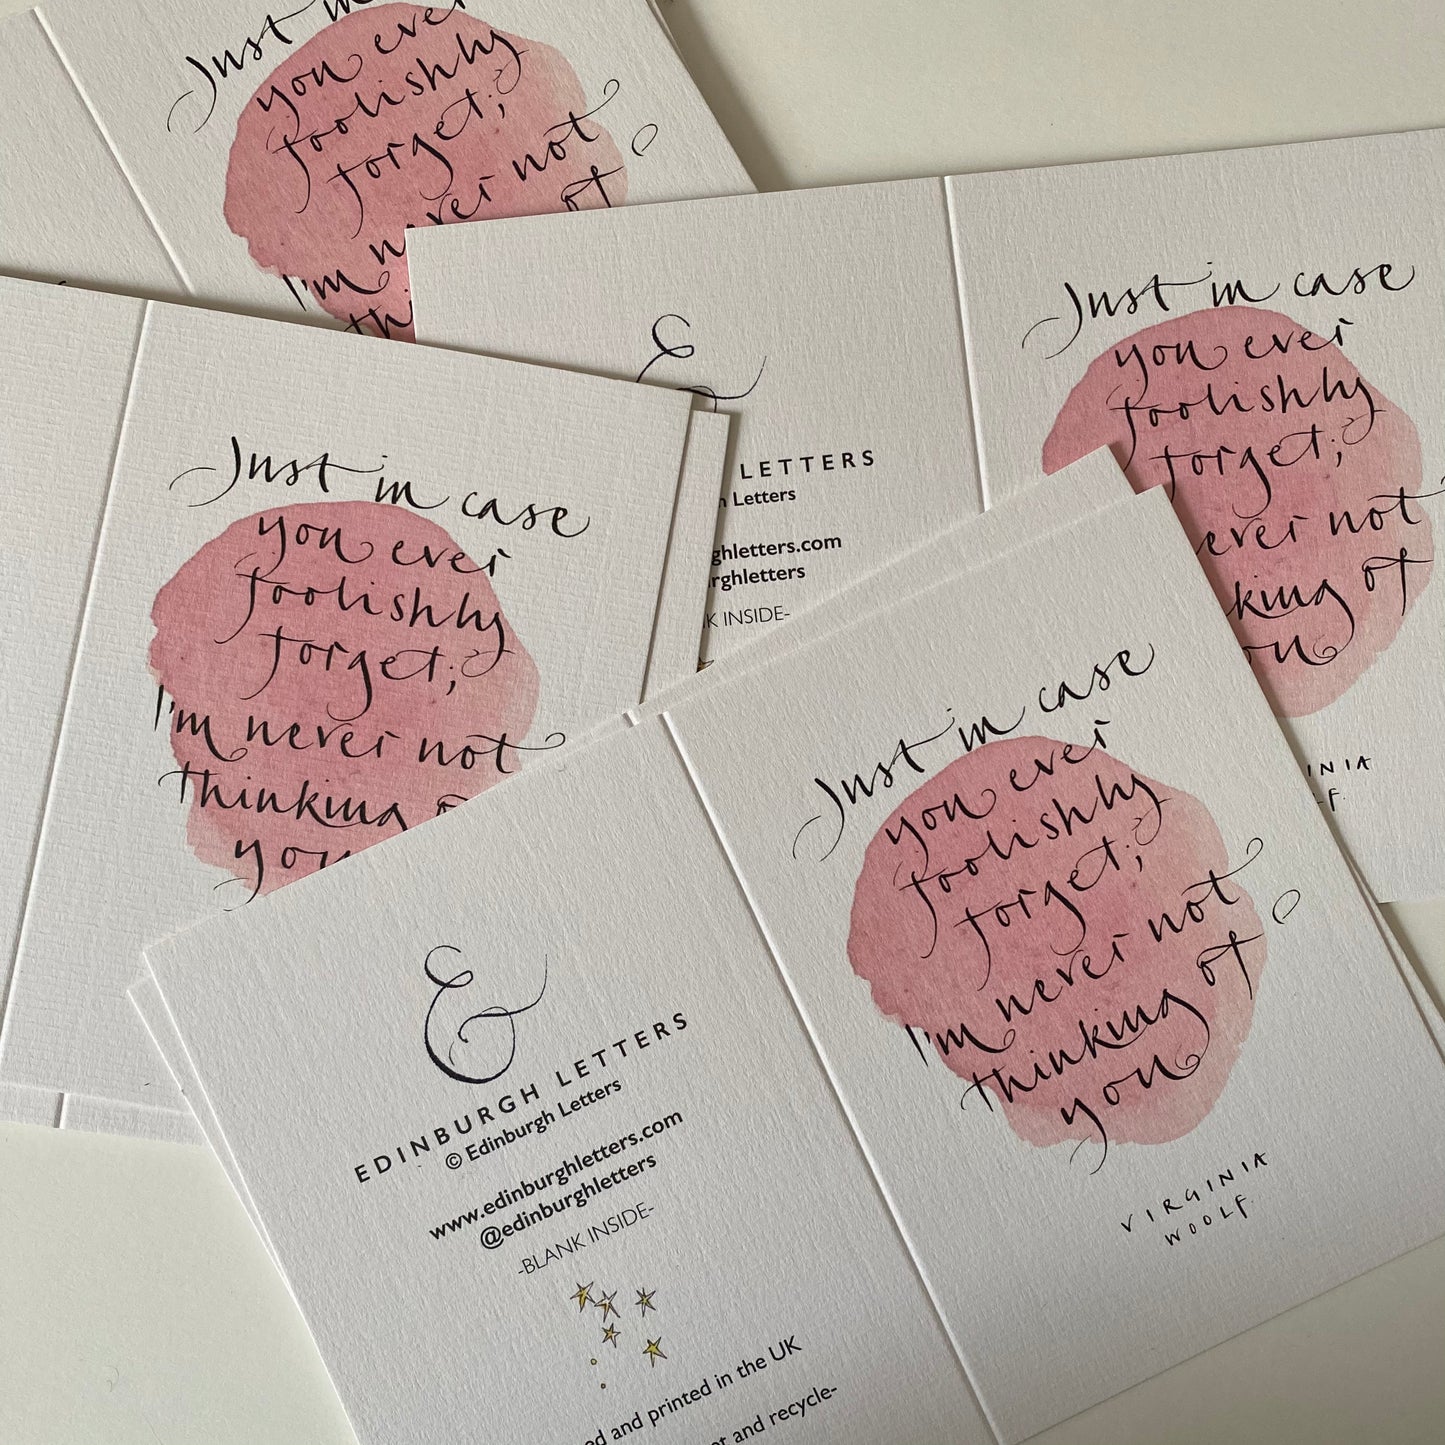 "Incase you ever foolishly forget...." pack of 4 cards